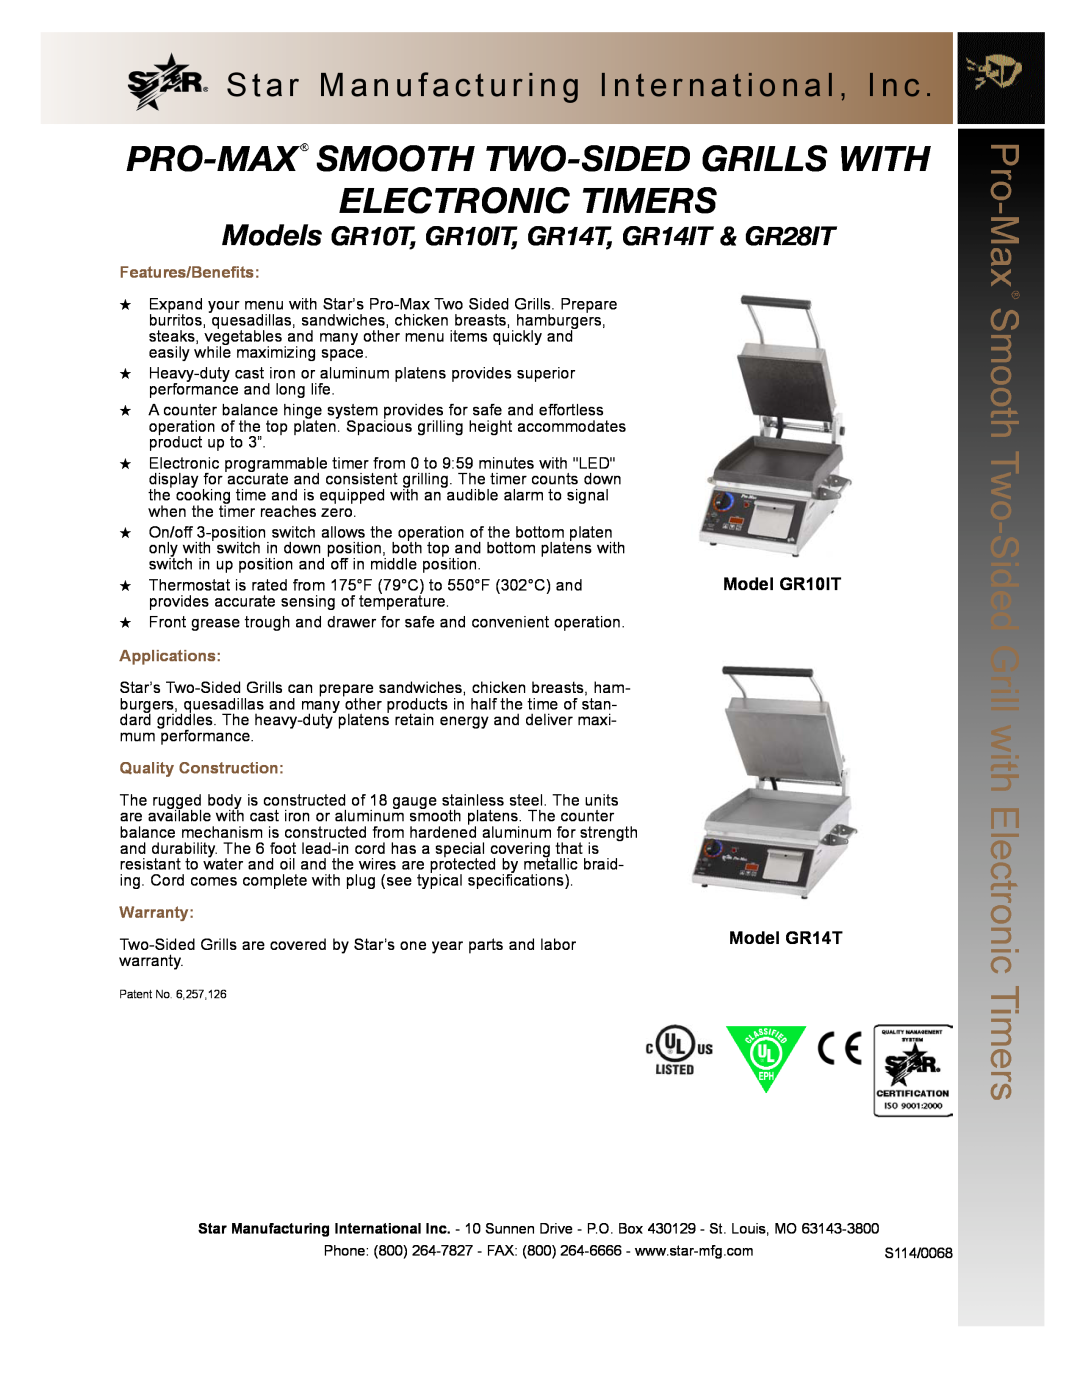 Star Manufacturing specifications Pro-Maxsmooth Two-Sidedgrills With, Electronic Timers, Model GR10IT, Model GR14T 